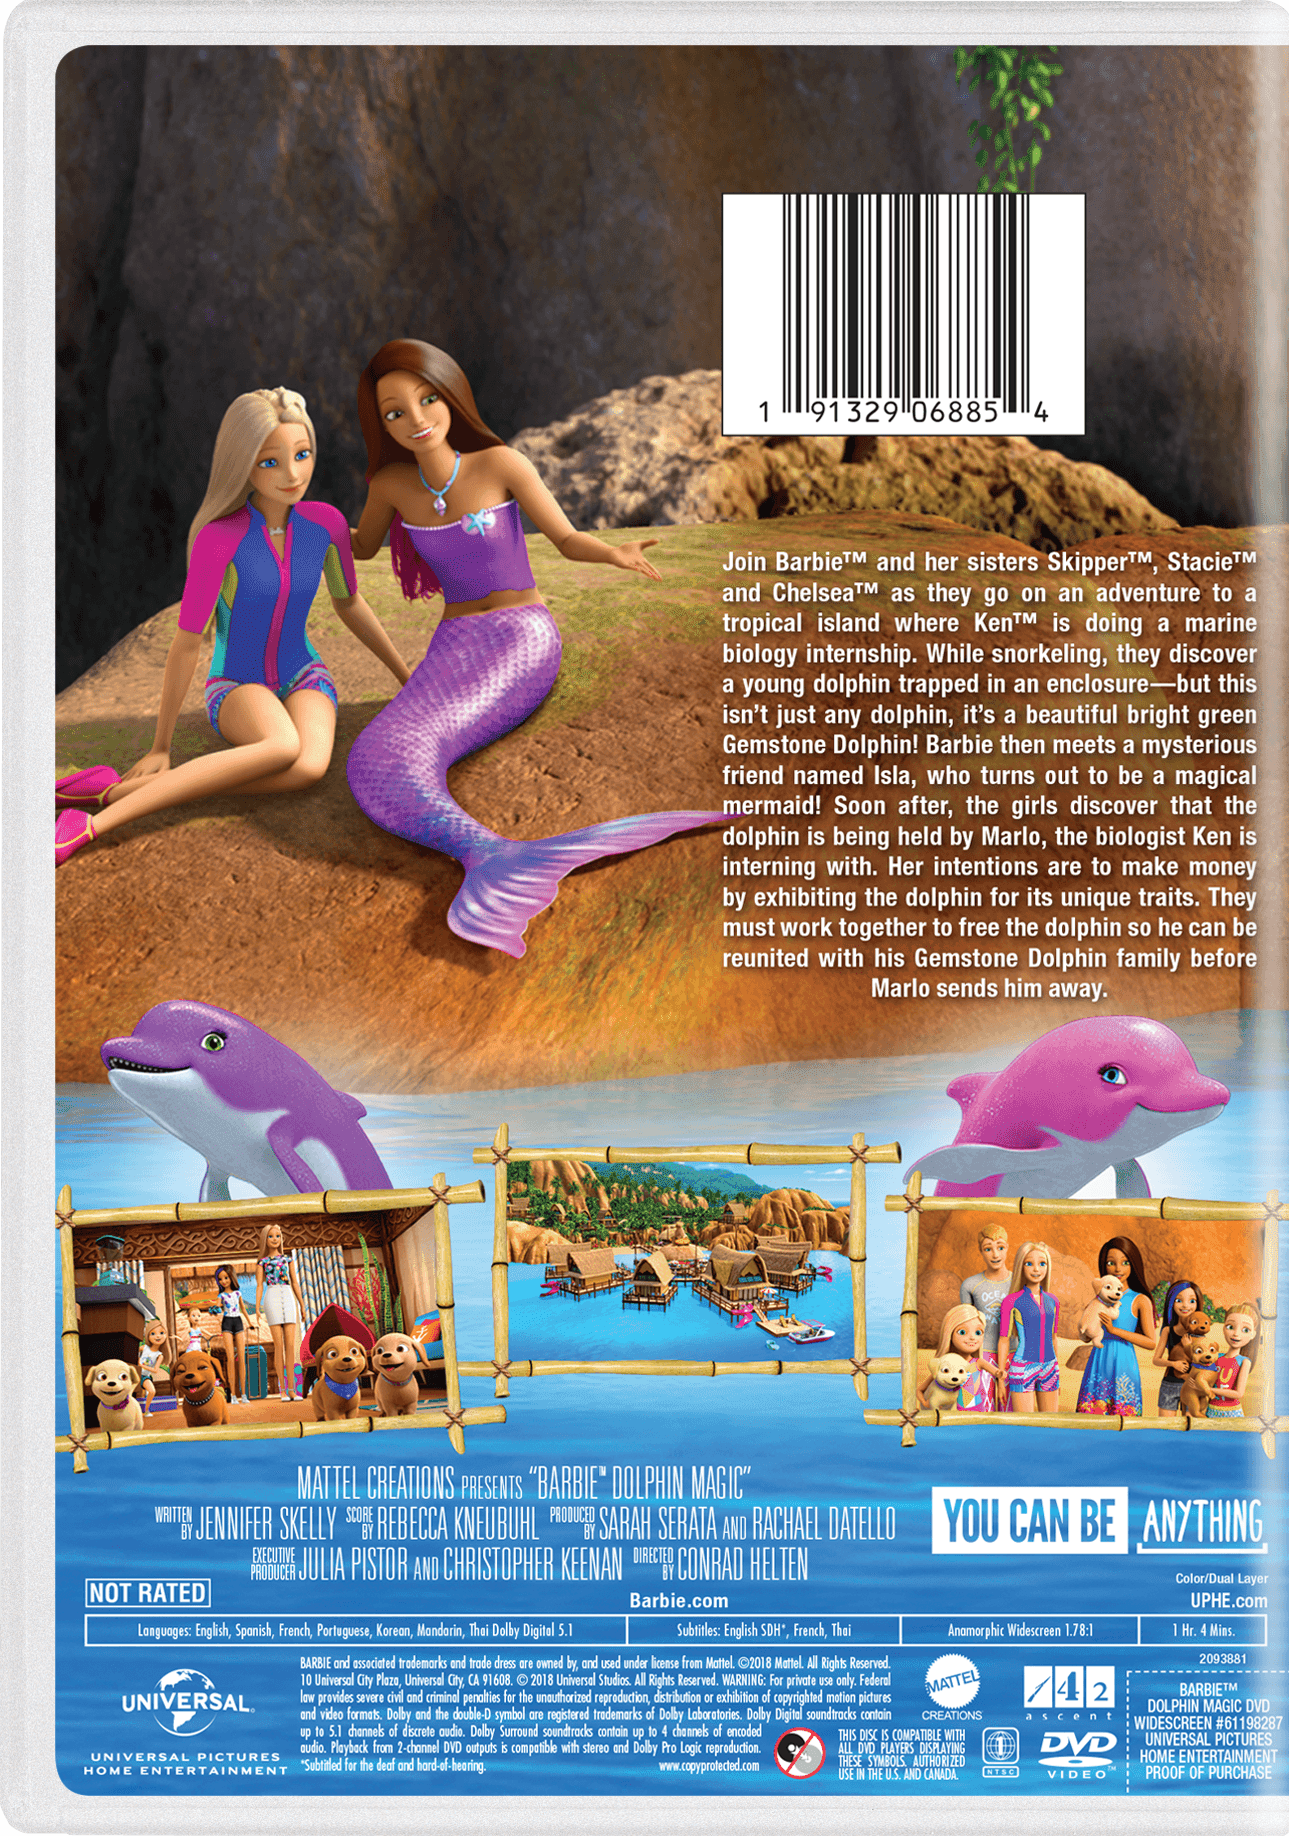 barbie and the dolphin magic